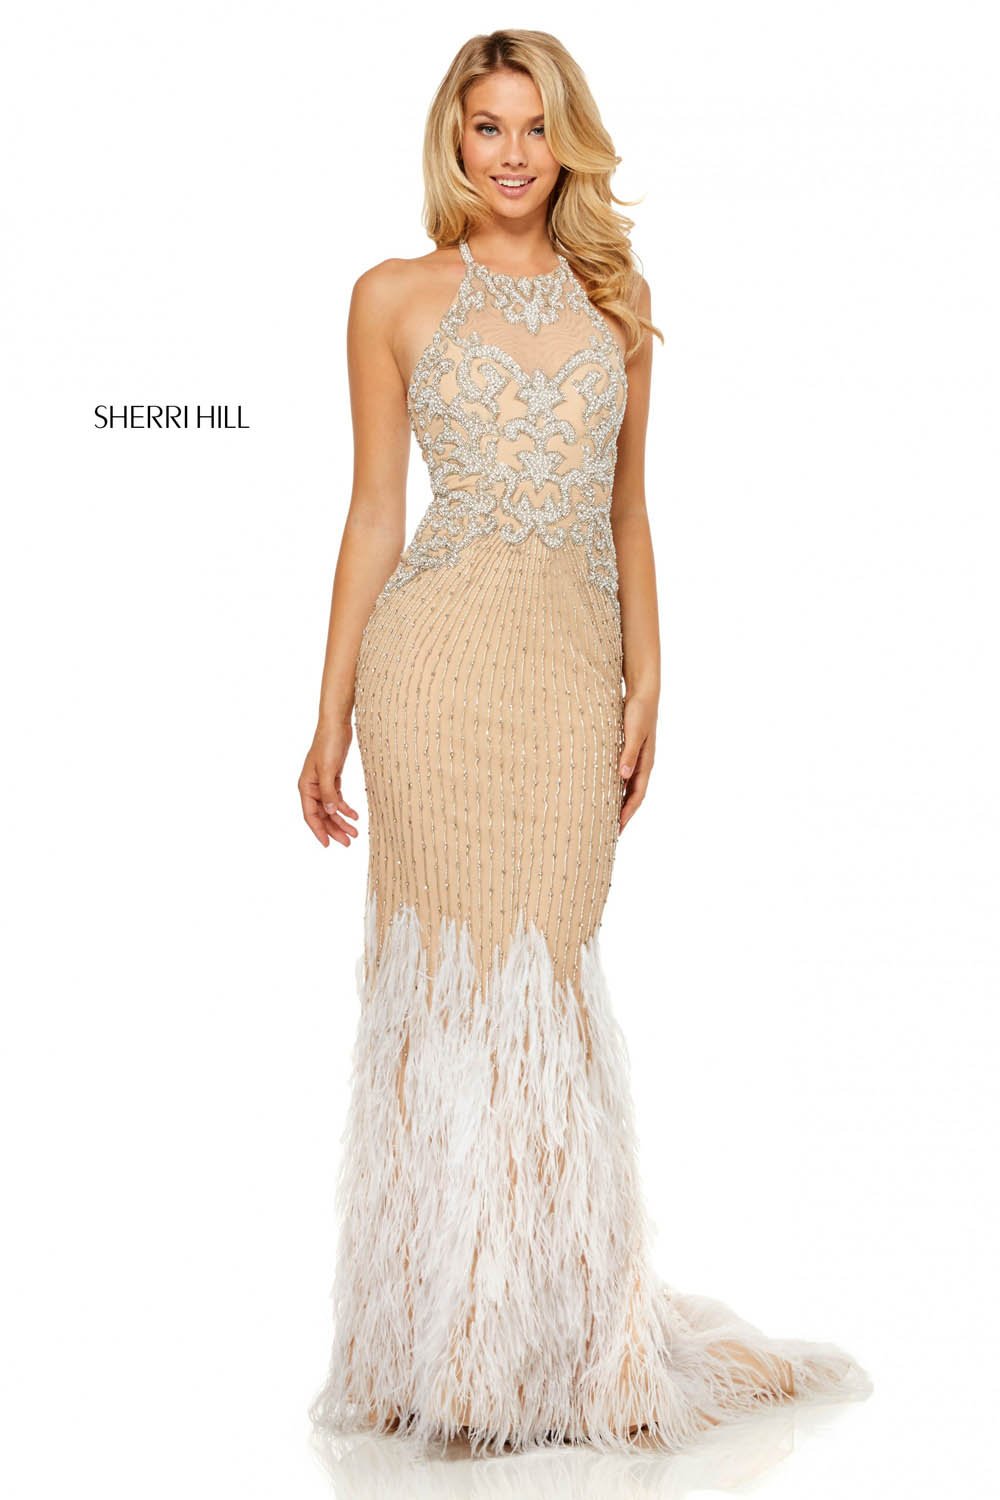 Sherri Hill 52517 dress images in these colors: Nude Silver, Ivory.